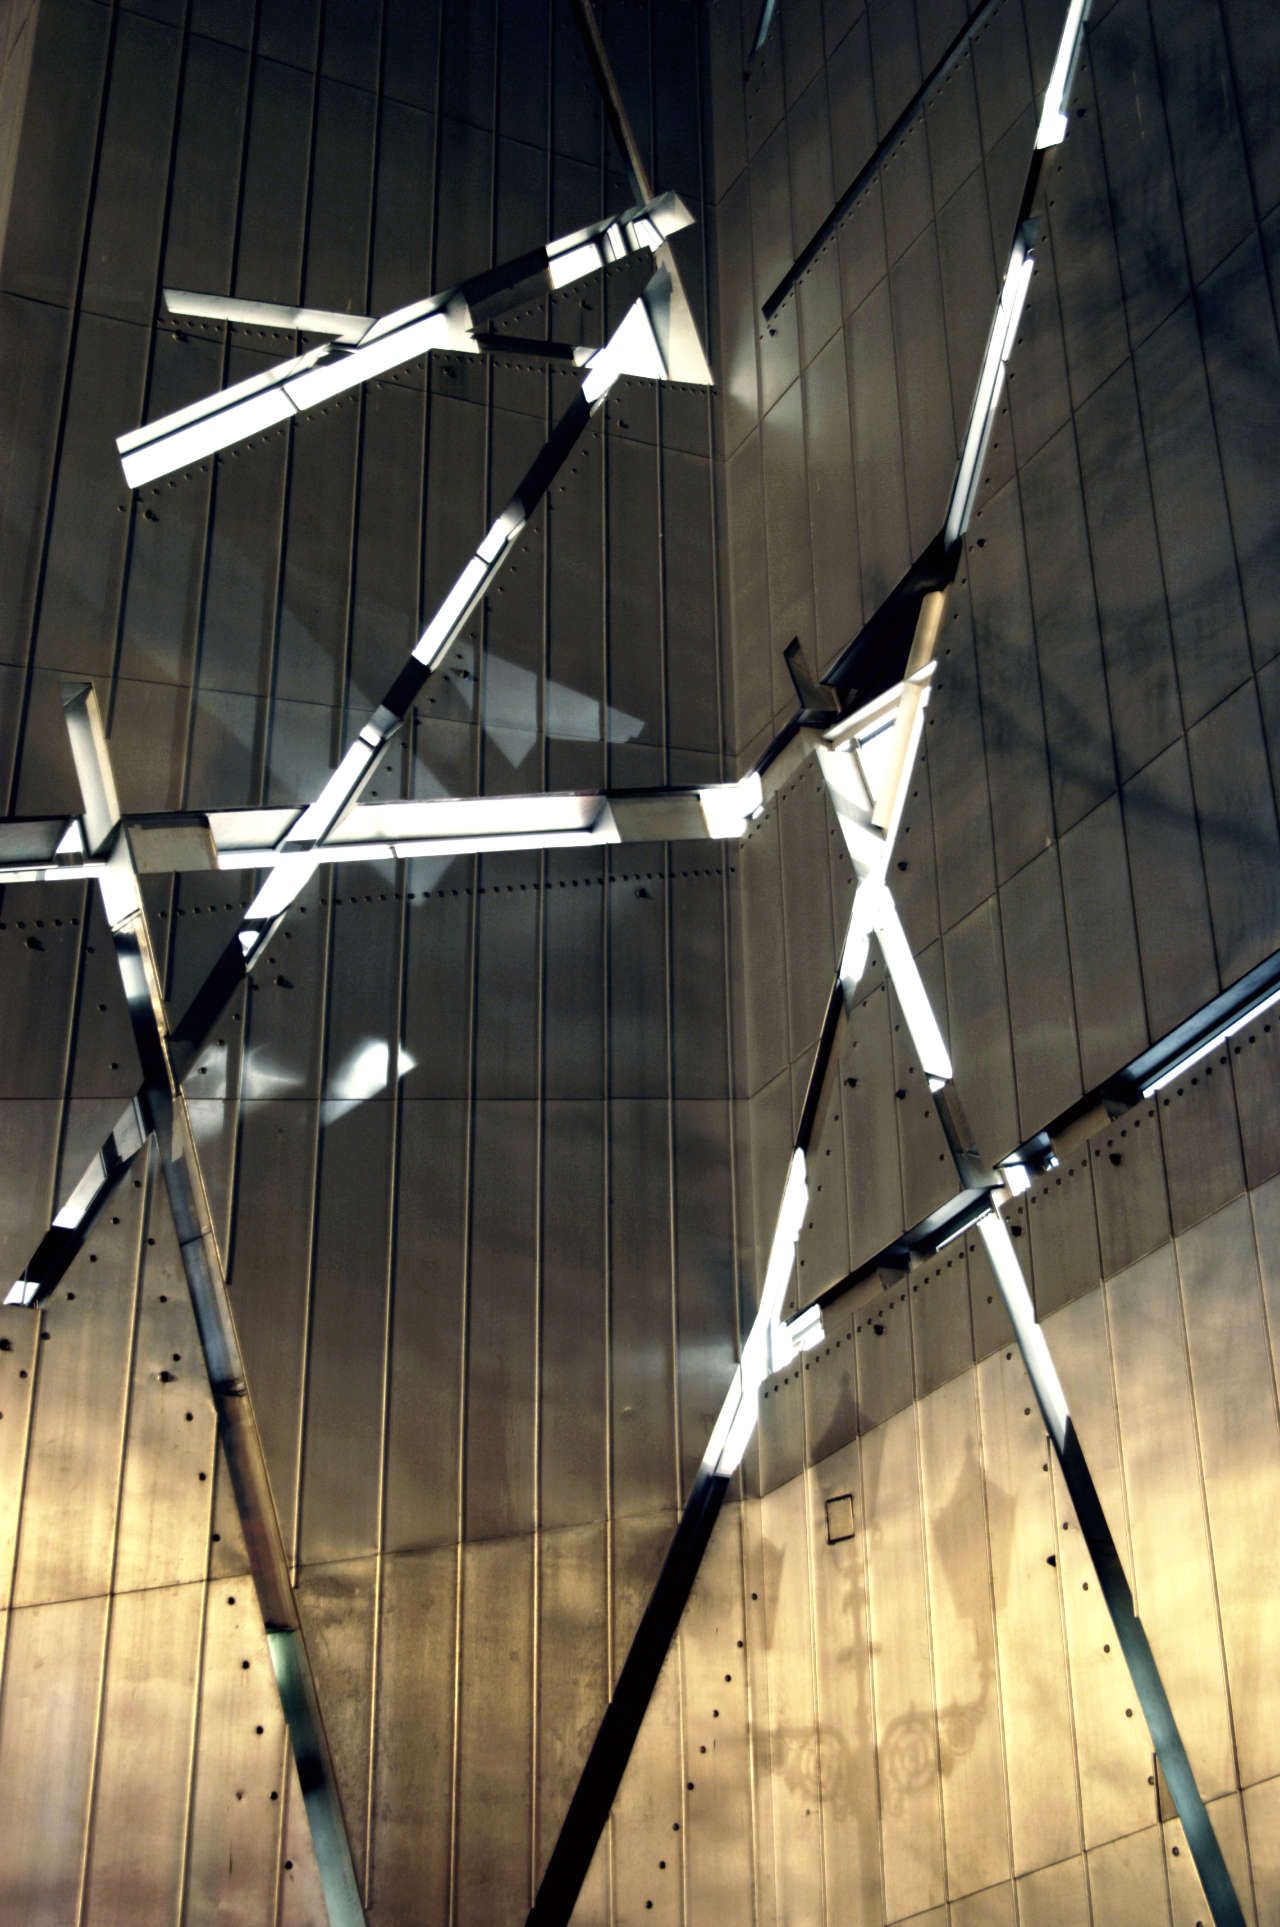 Transformation of the “Star of David” in the elevation of Libeskind’s Jewish Museum